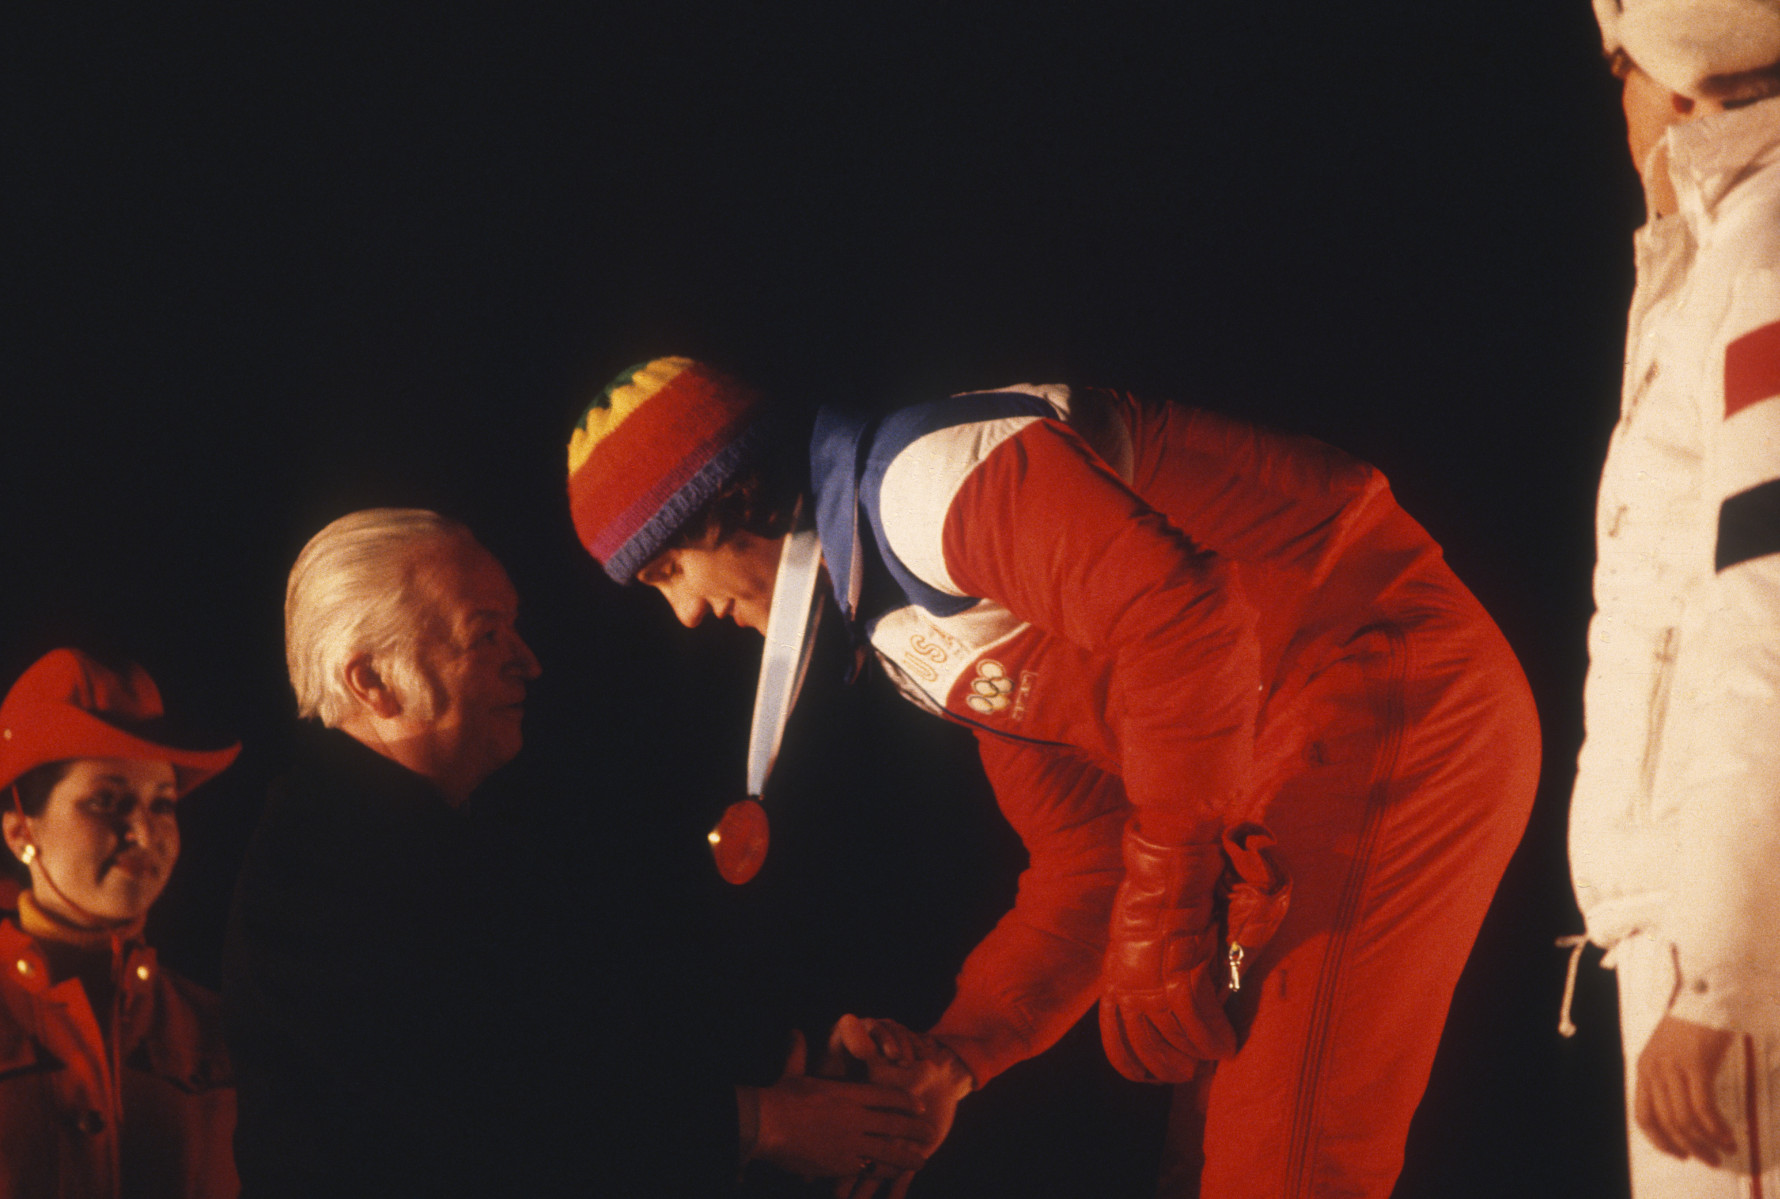 Eric Heiden being awarded one of his five gold medals at the 1980 Lake Placid Olympics : Olympics : Photography by Adam Stoltman: Sports Photography, The Arts, Portraiture, Travel, Photojournalism and Fine Art in New York